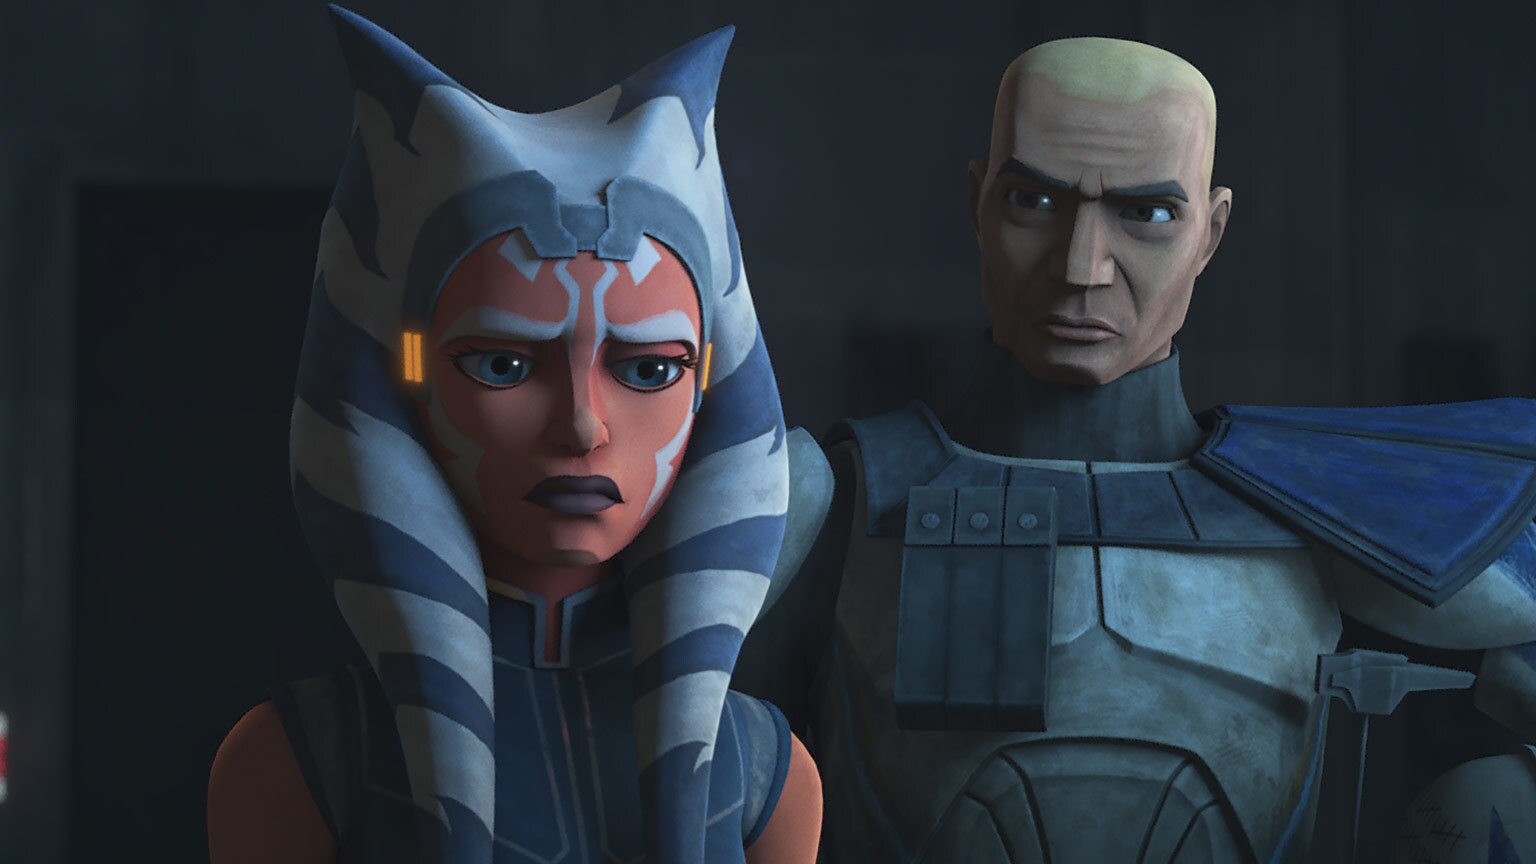 Rex and Ahsoka in "Shattered"